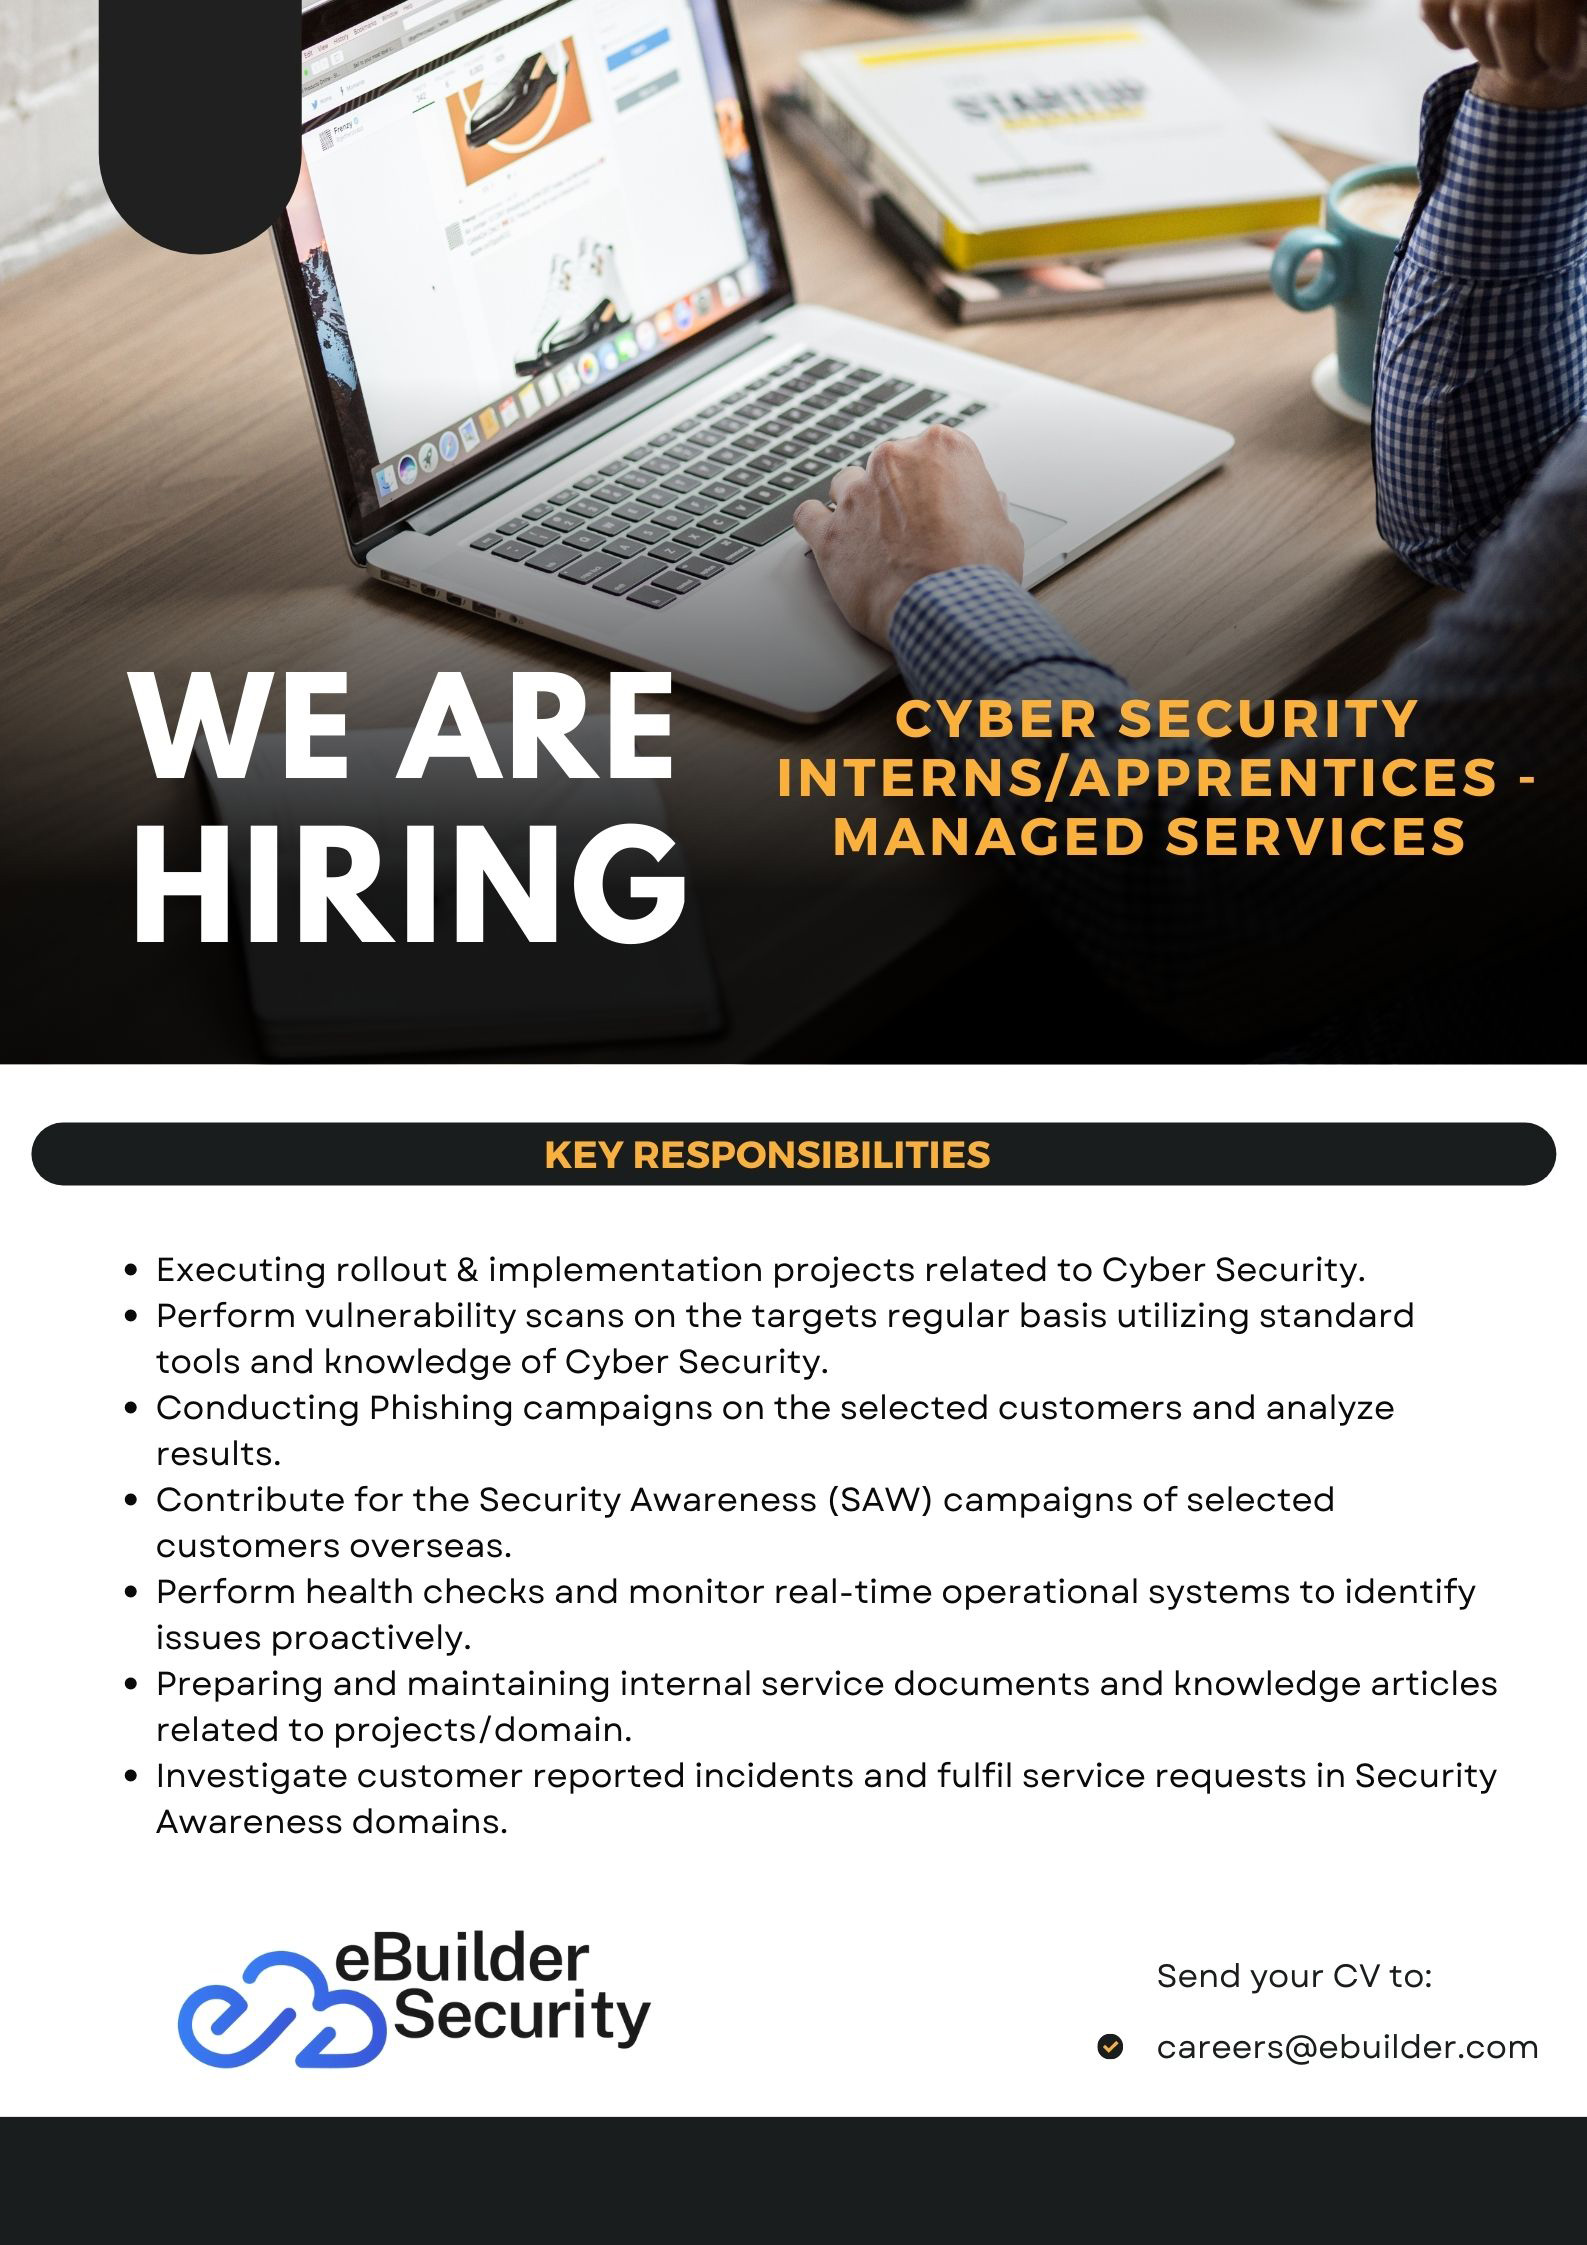 Cyber security Intern/Apprentice - Managed Services